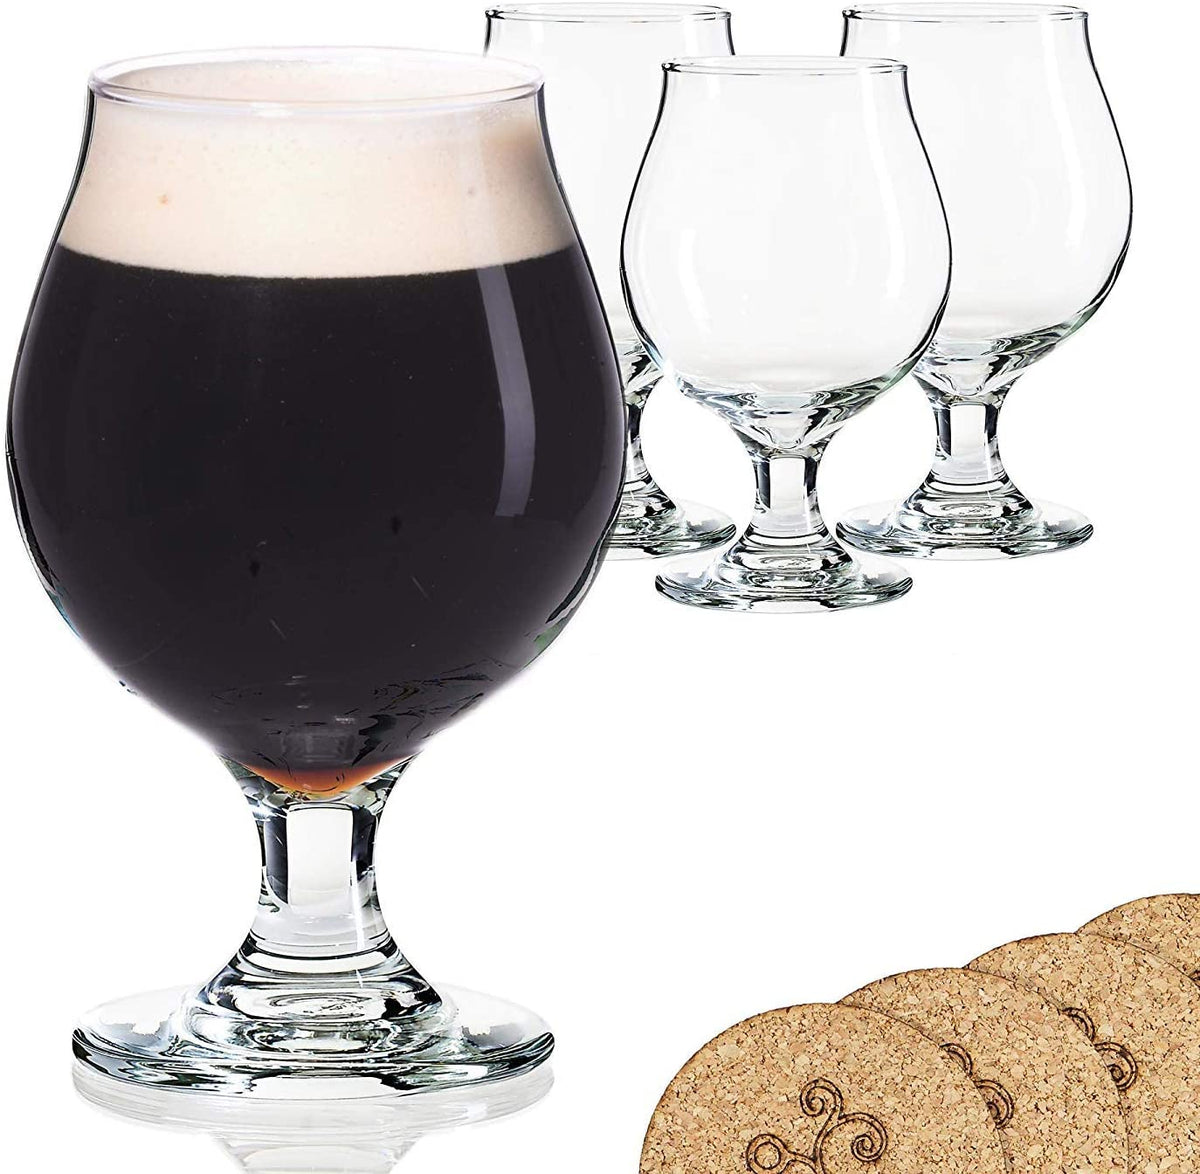 The Best Glassware for Every Beer Style, From Mugs to Tulips